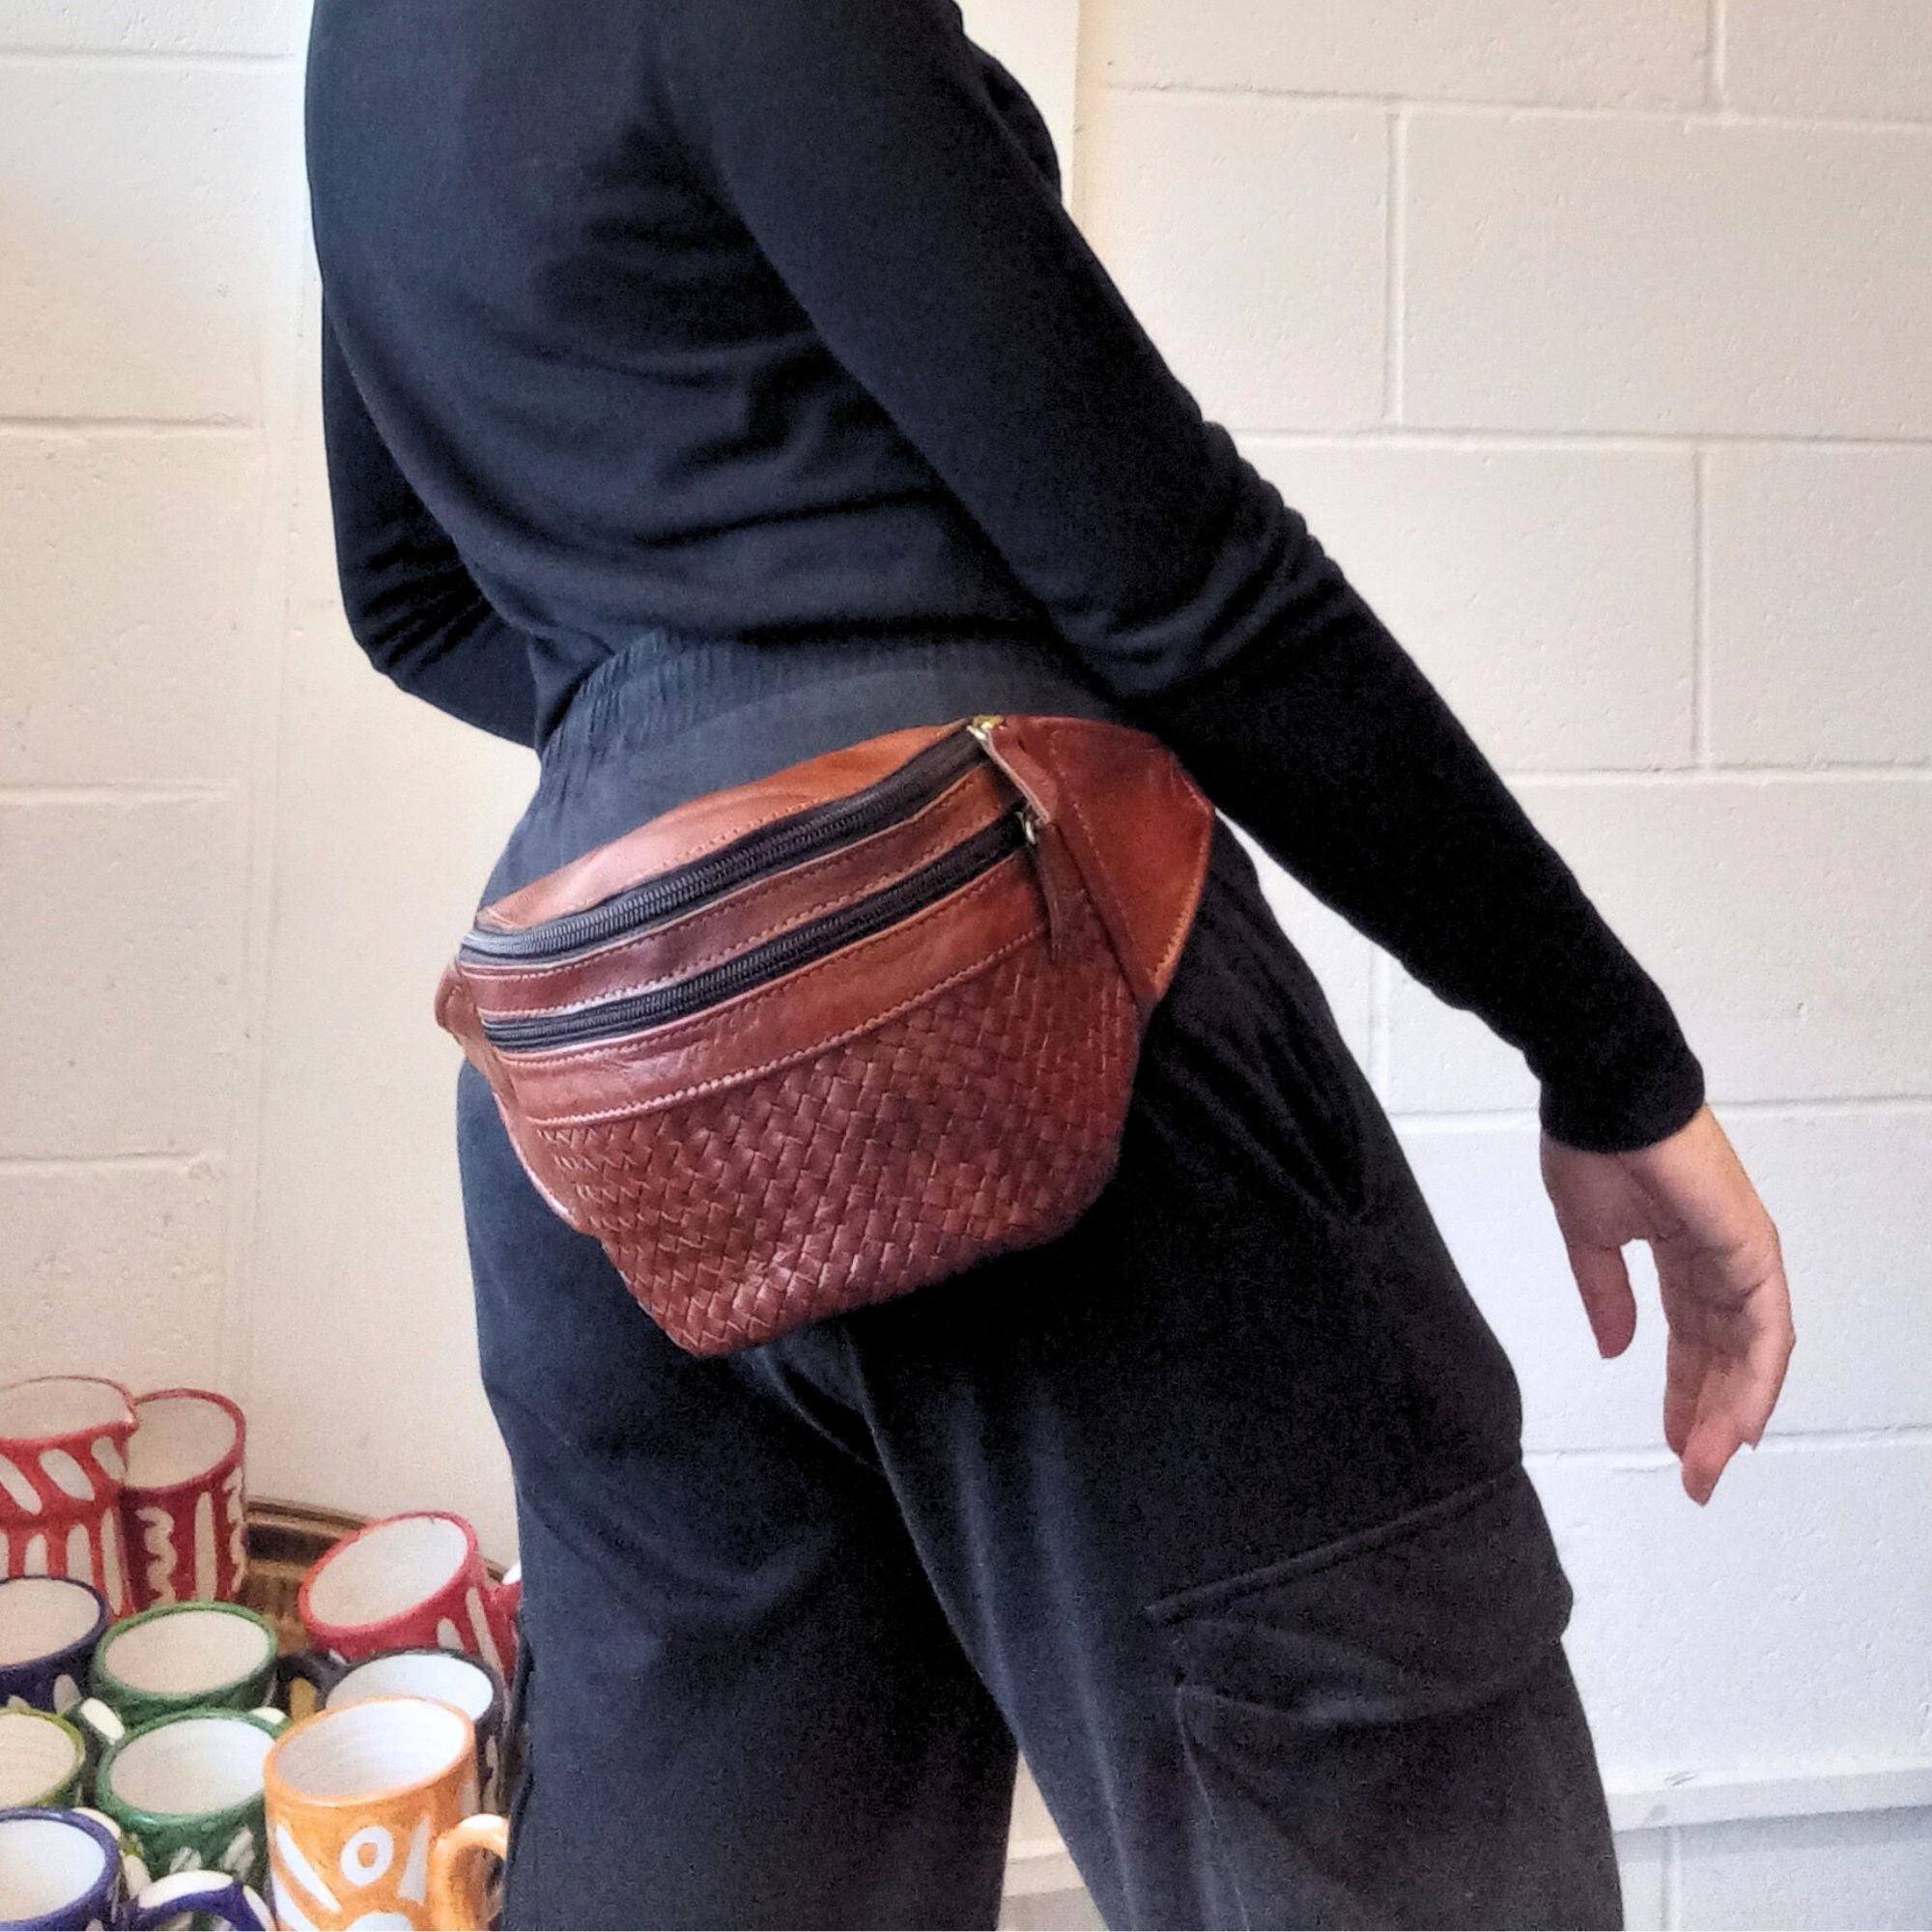 model with a leather bum bag in tan brown